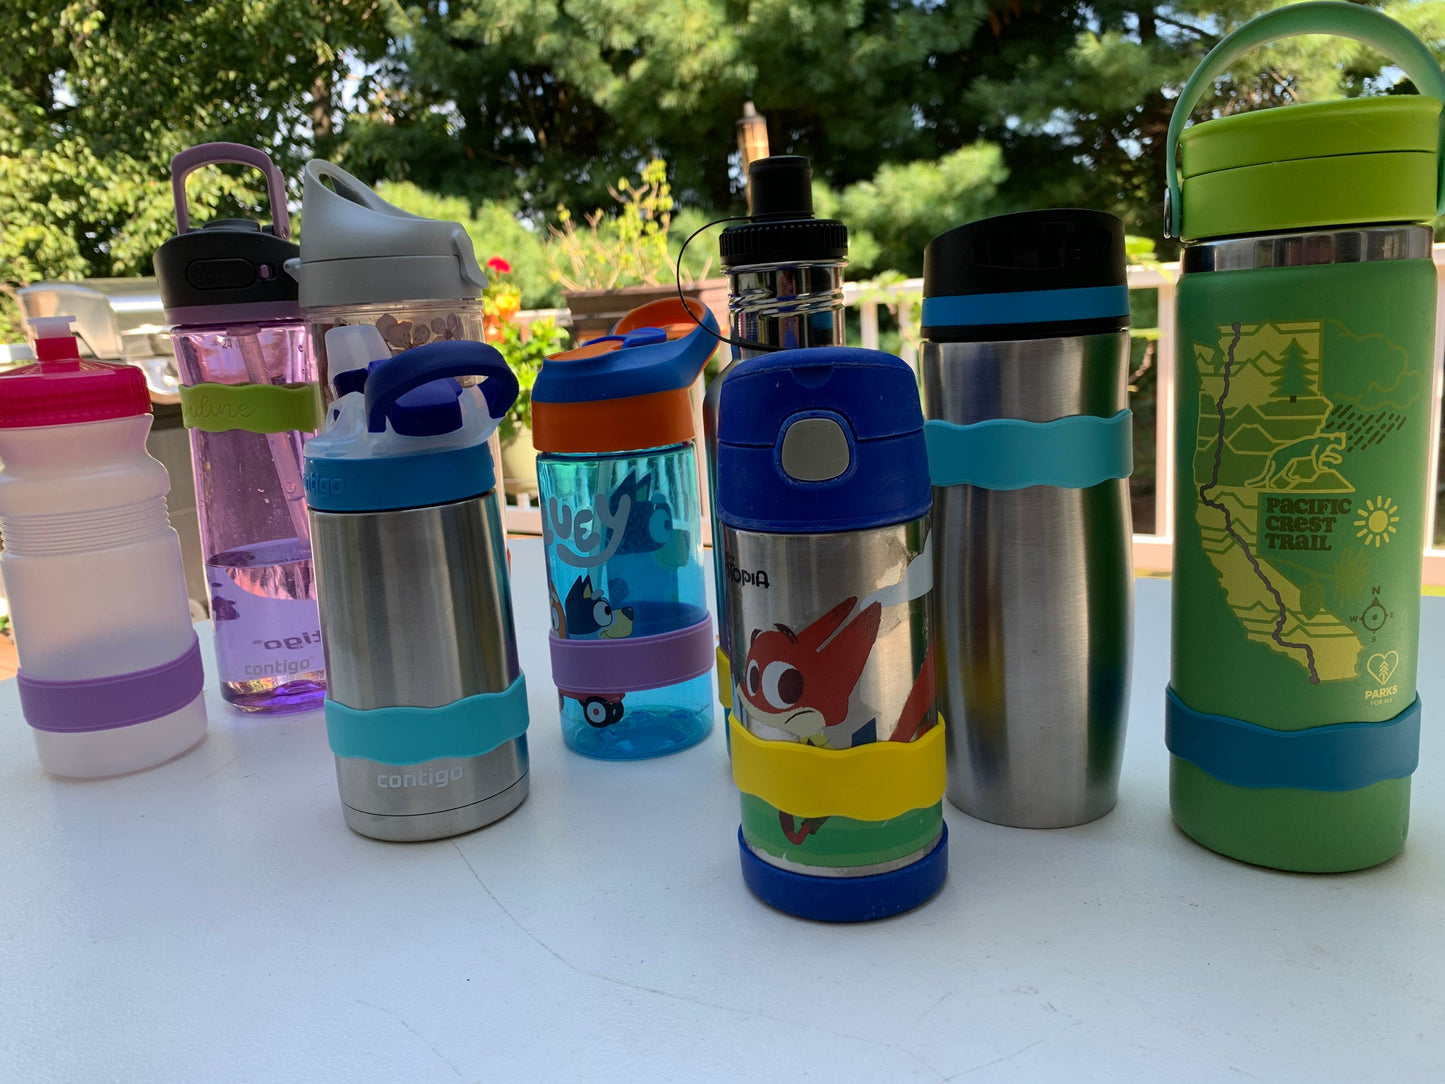 Personalized silicone water bottle band